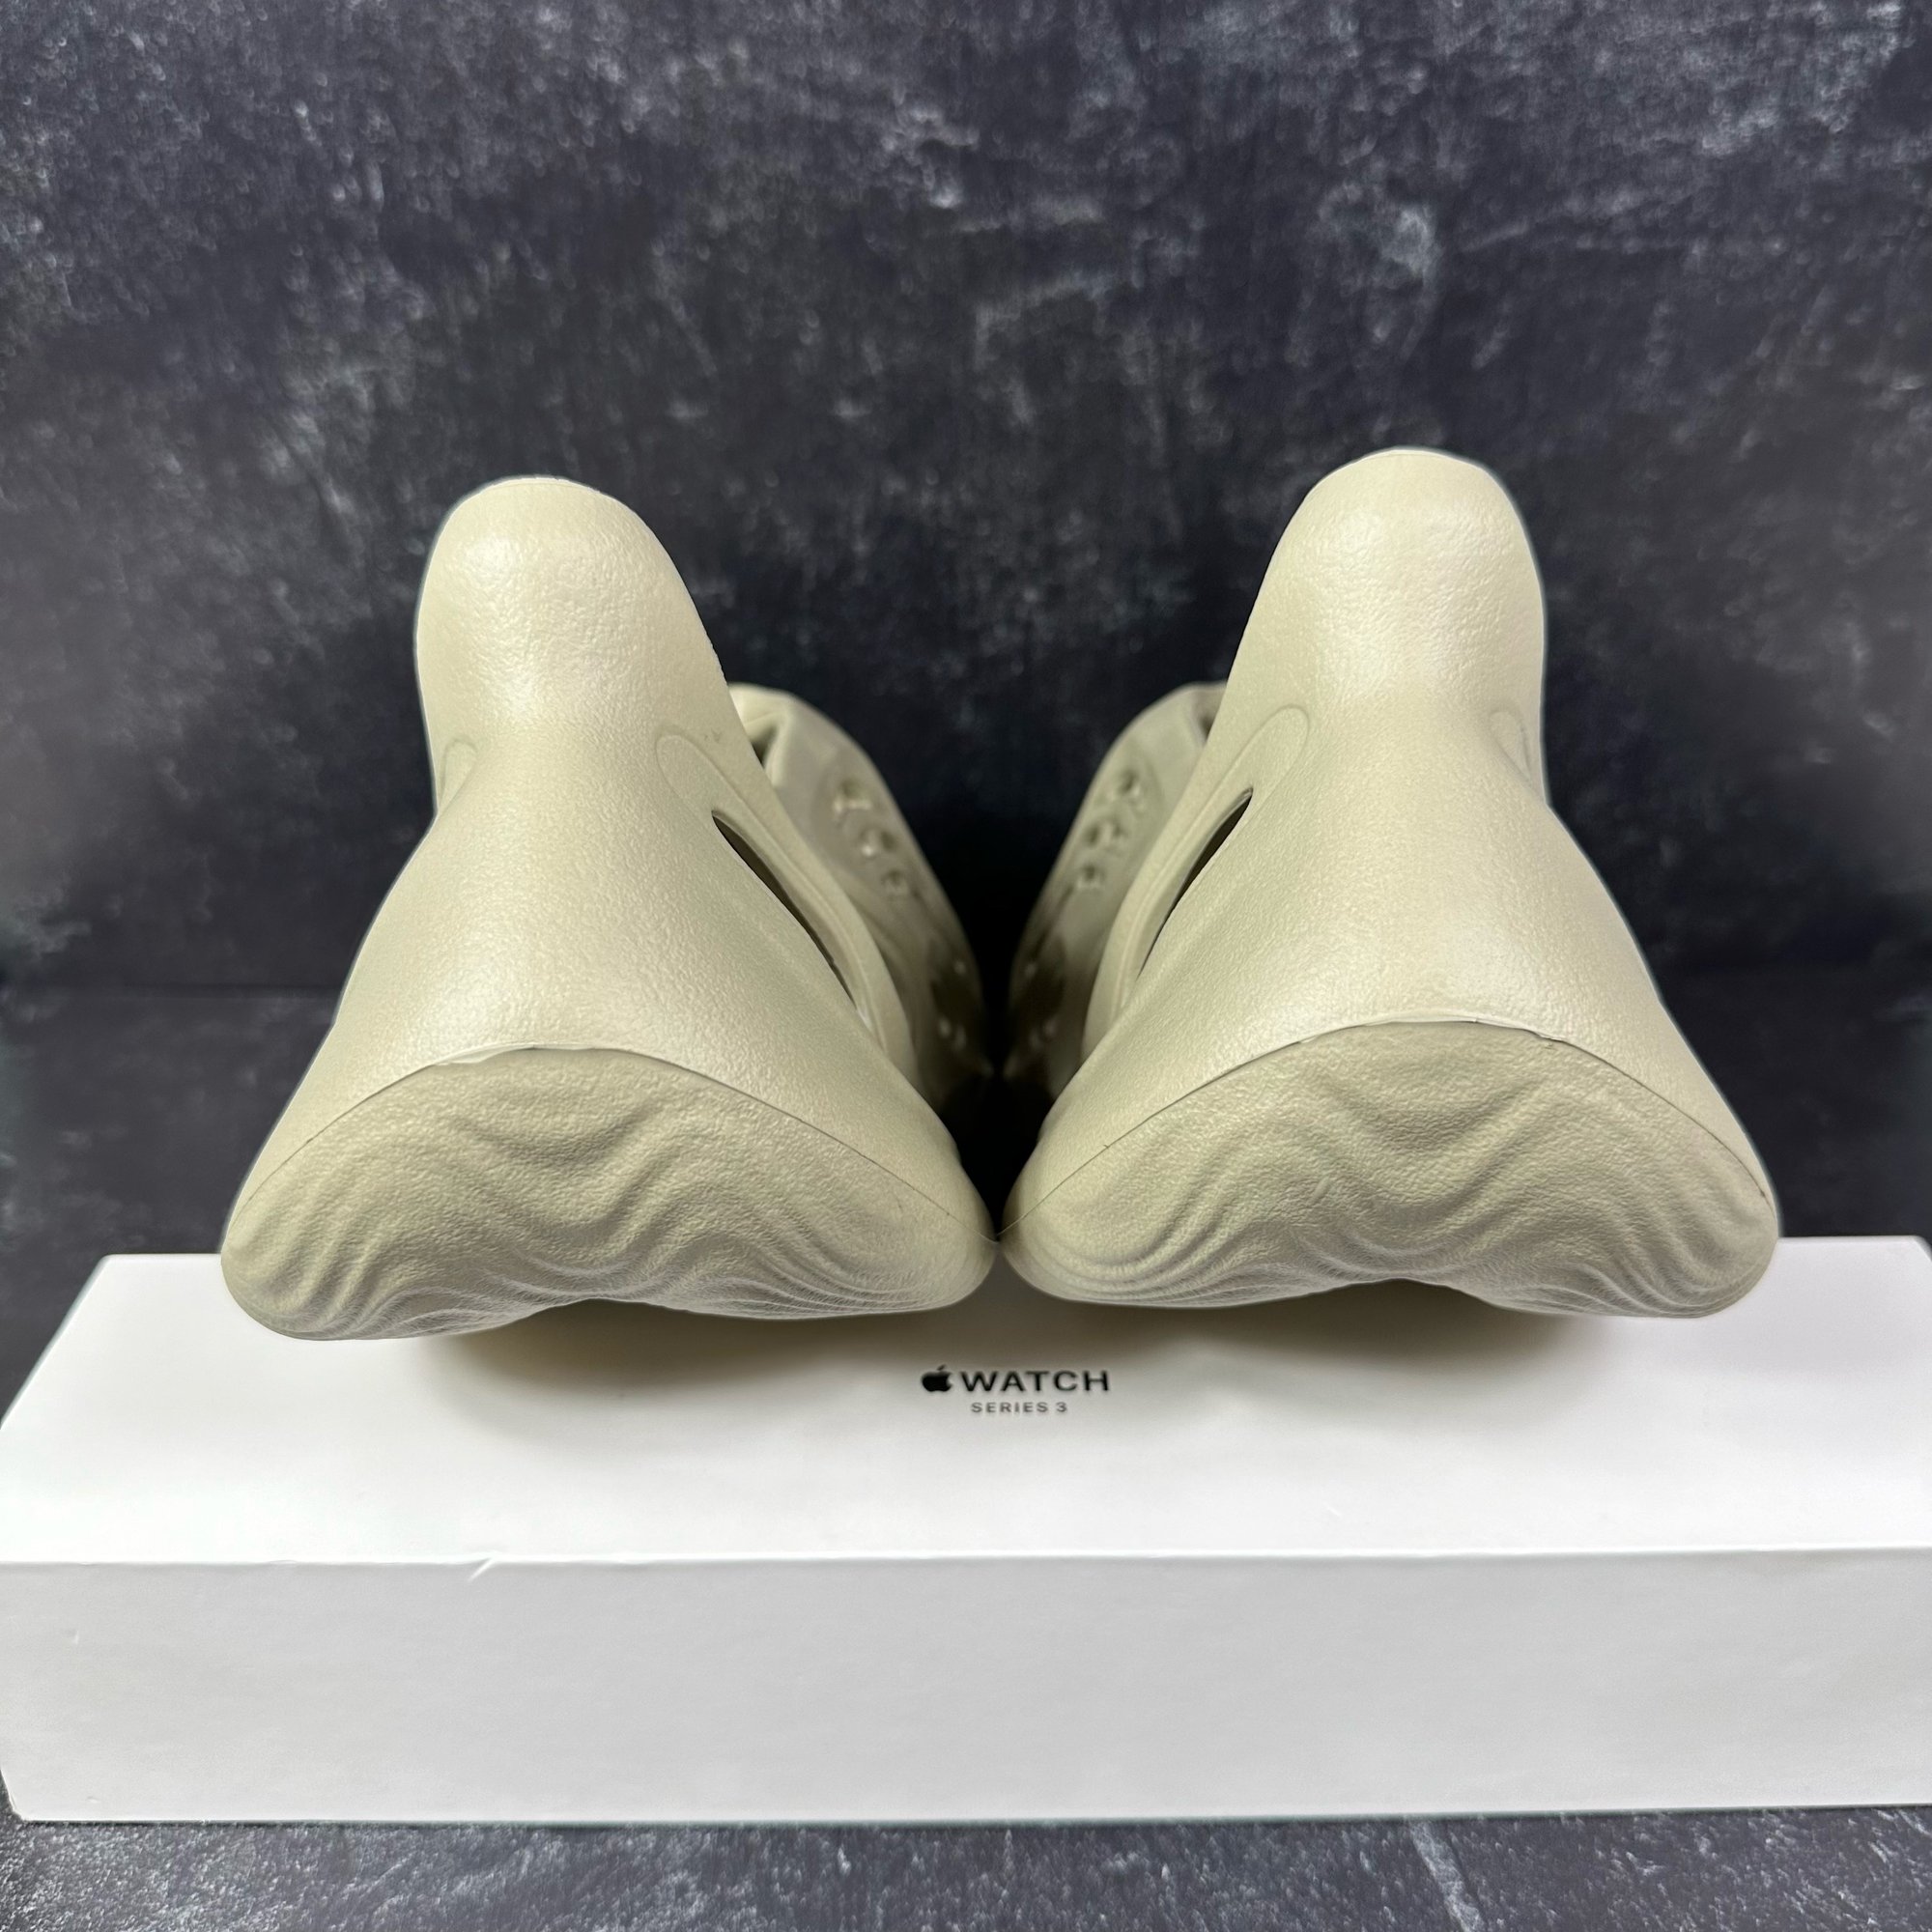 Yeezy Foam Runner Sizing: How Do They Fit?